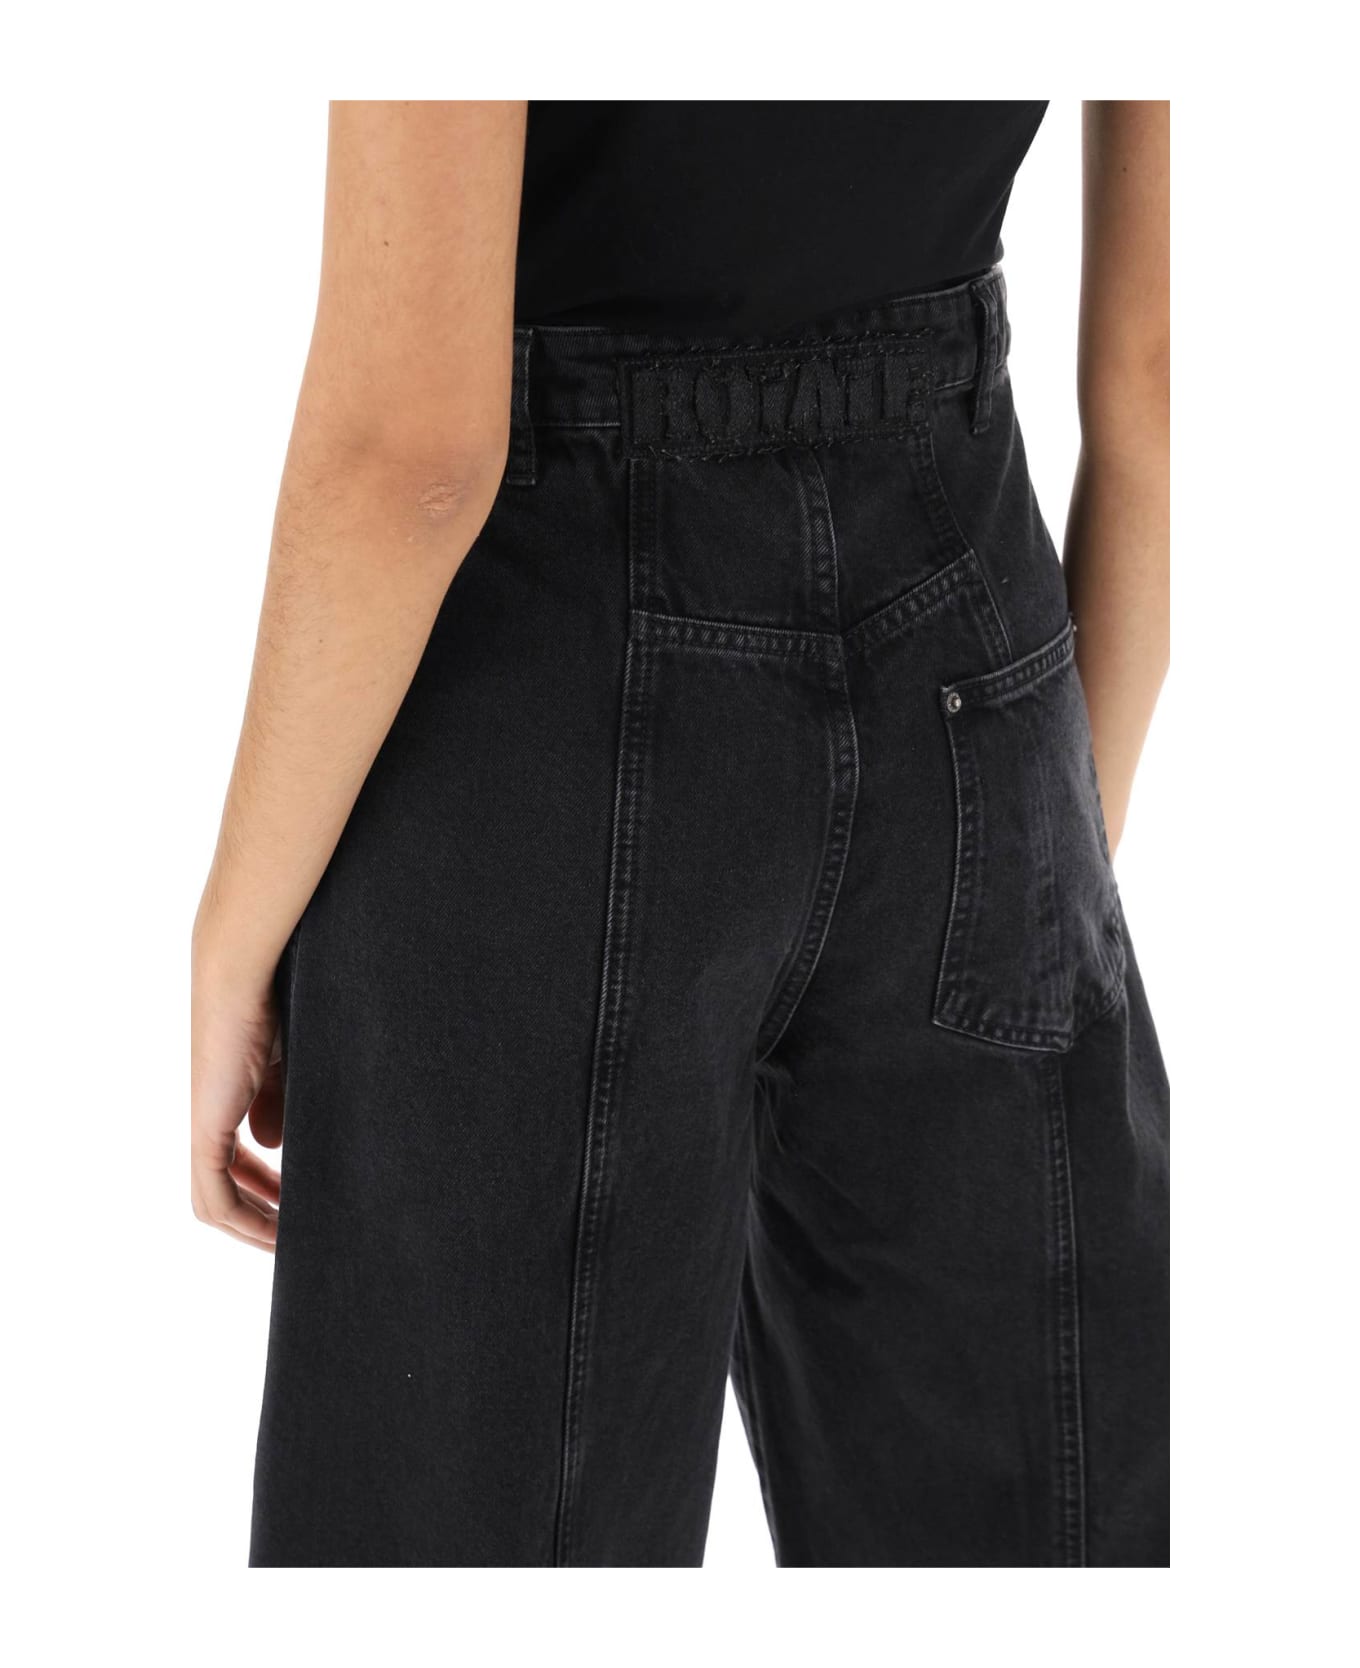 Rotate by Birger Christensen Baggy Jeans With Curved Leg - BLACK WASHED (Black)